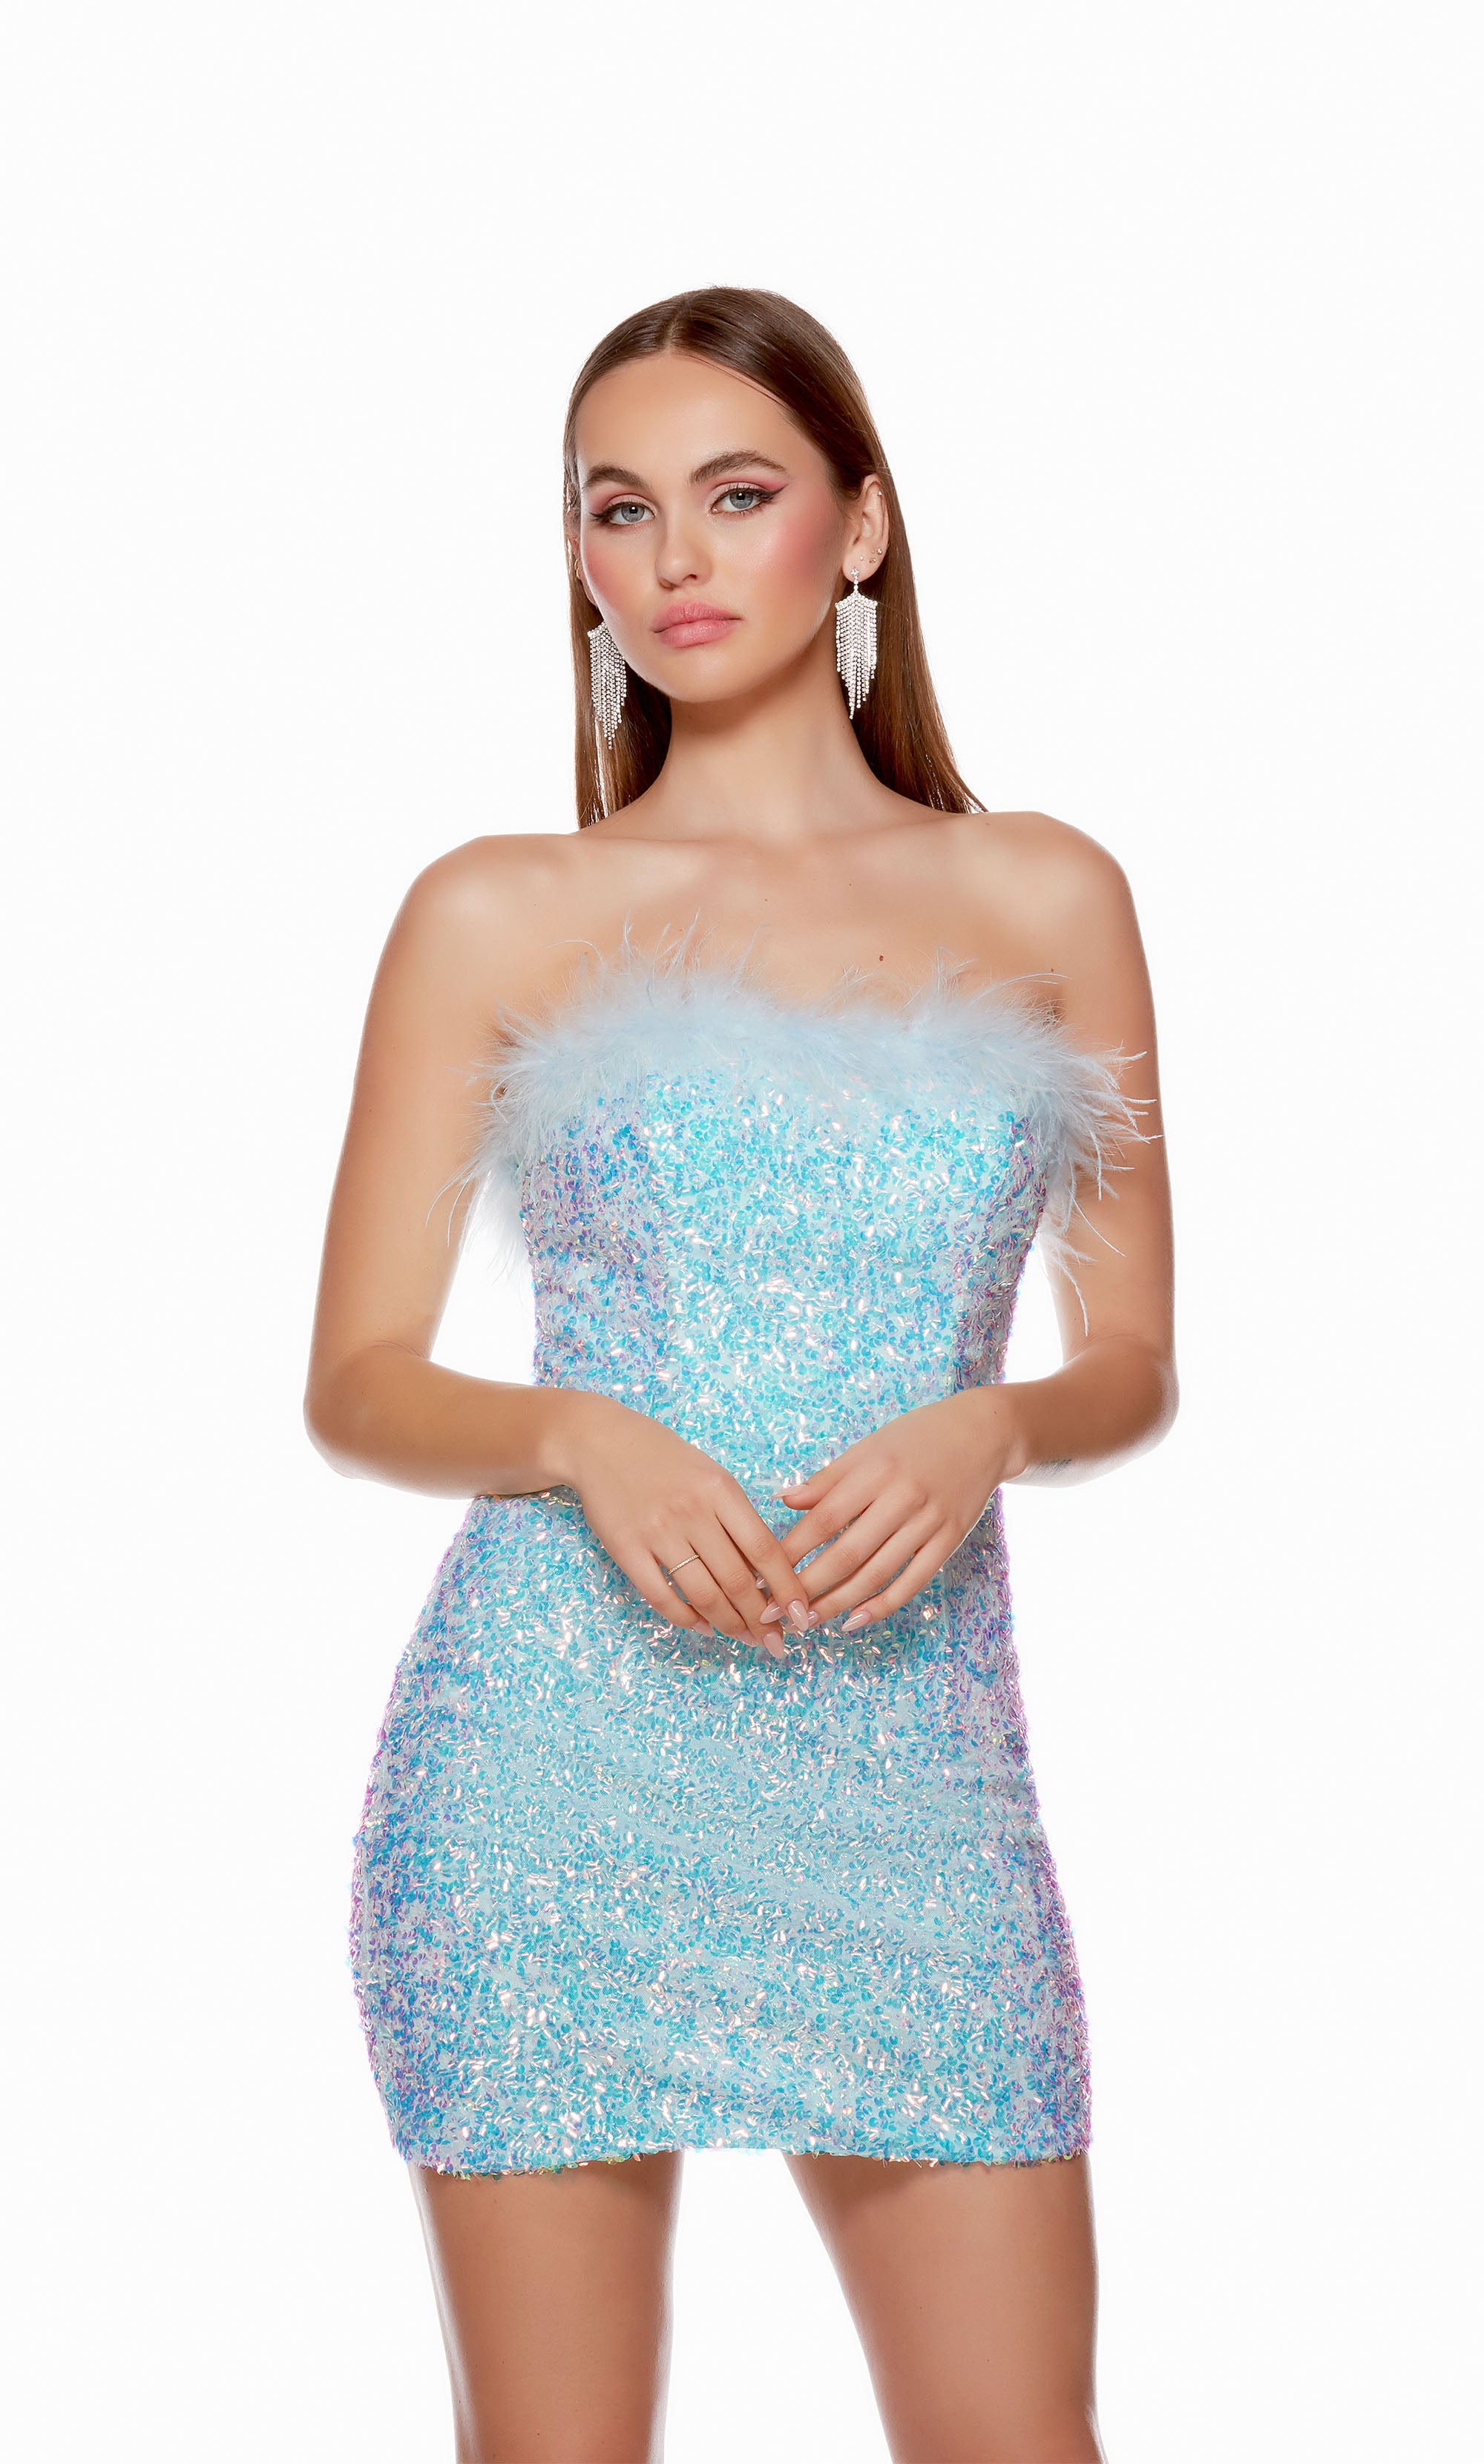 A fun and flirty tube dress made from a light orchid (purple) iridescent sequin fabric. The dress has an off-the-shoulder neckline with matching pink feather trim to complete the glam look.